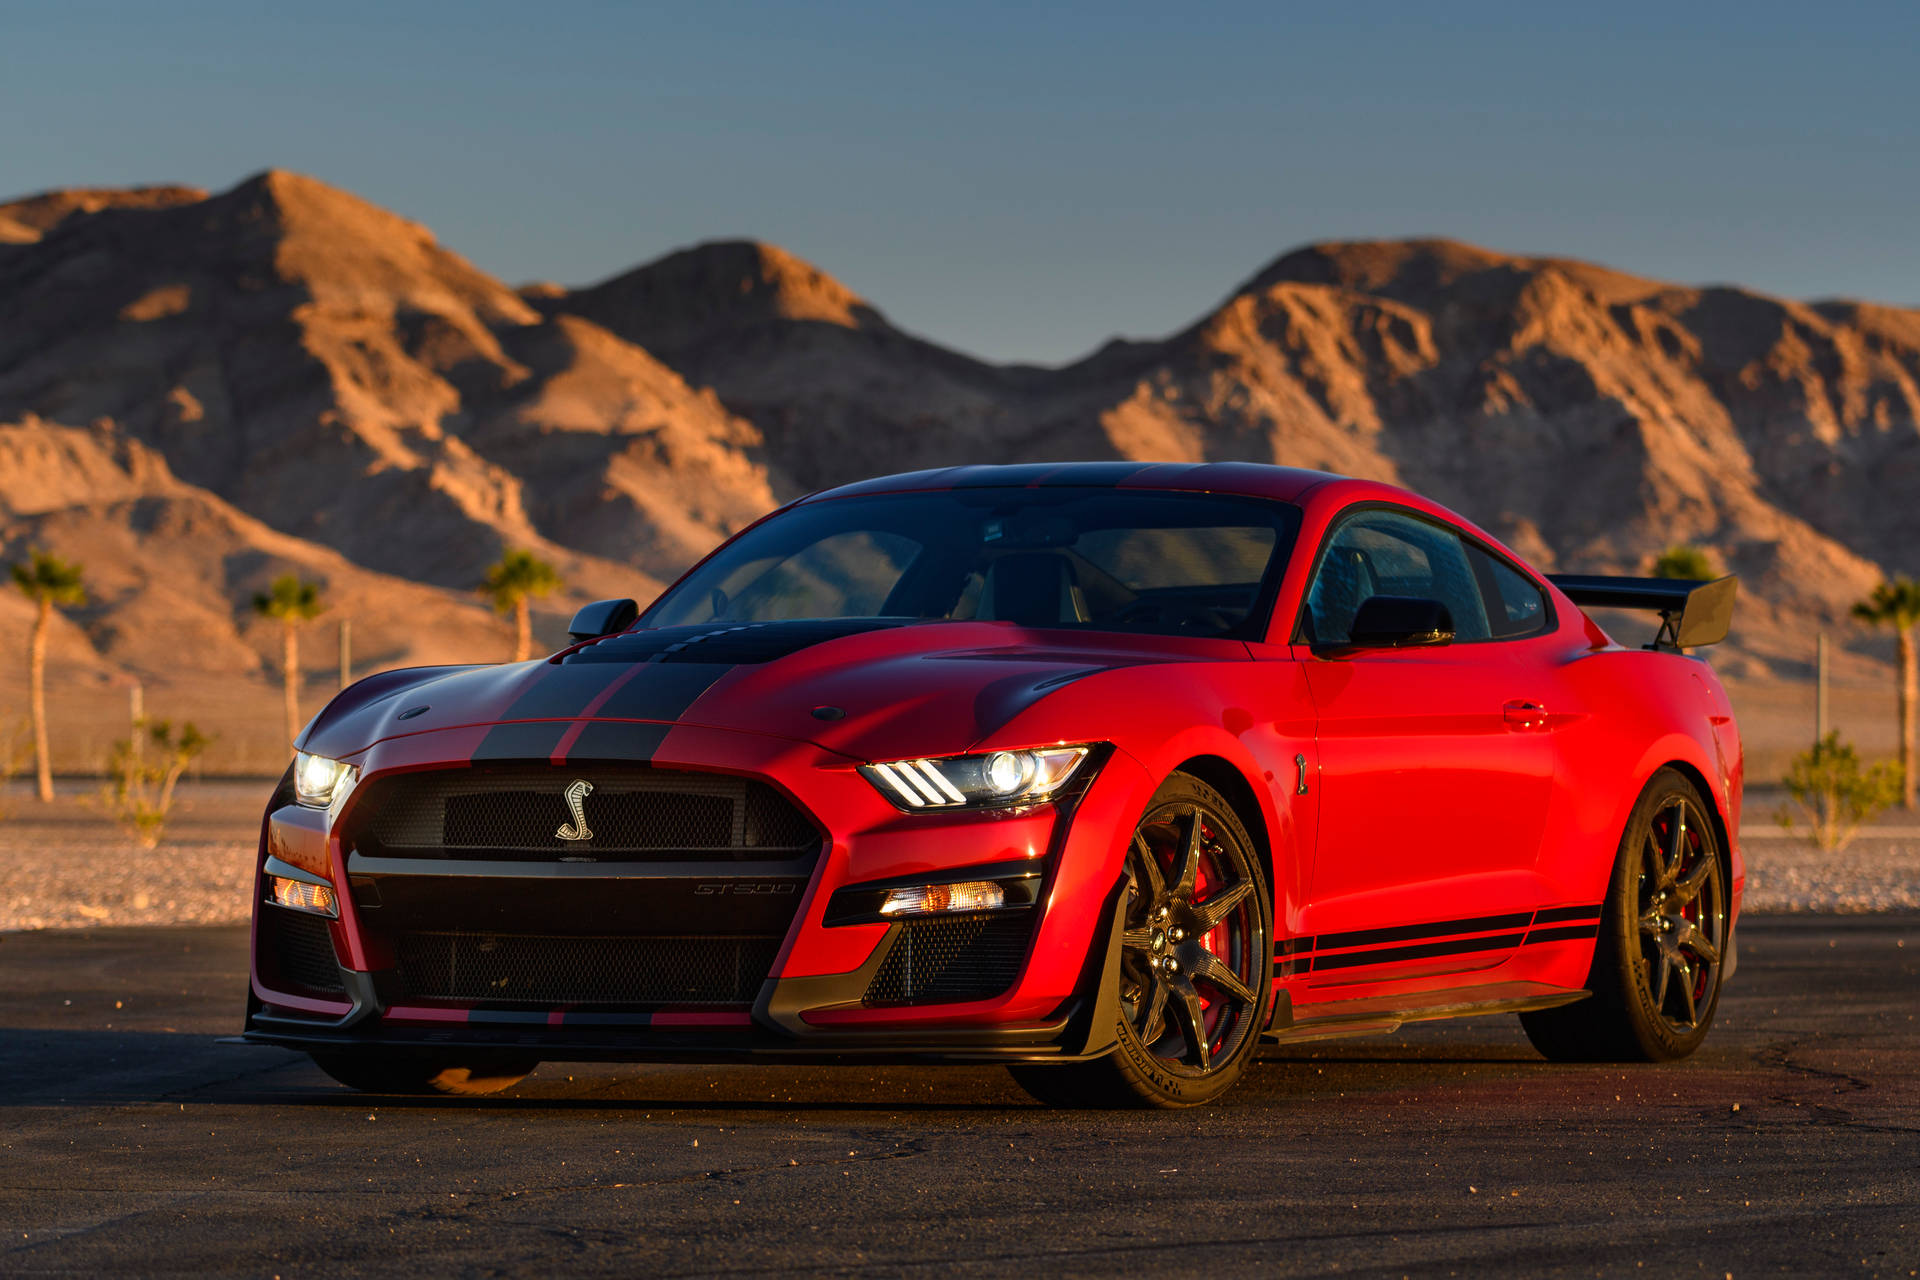 Cool Mustang With Mountains Wallpaper